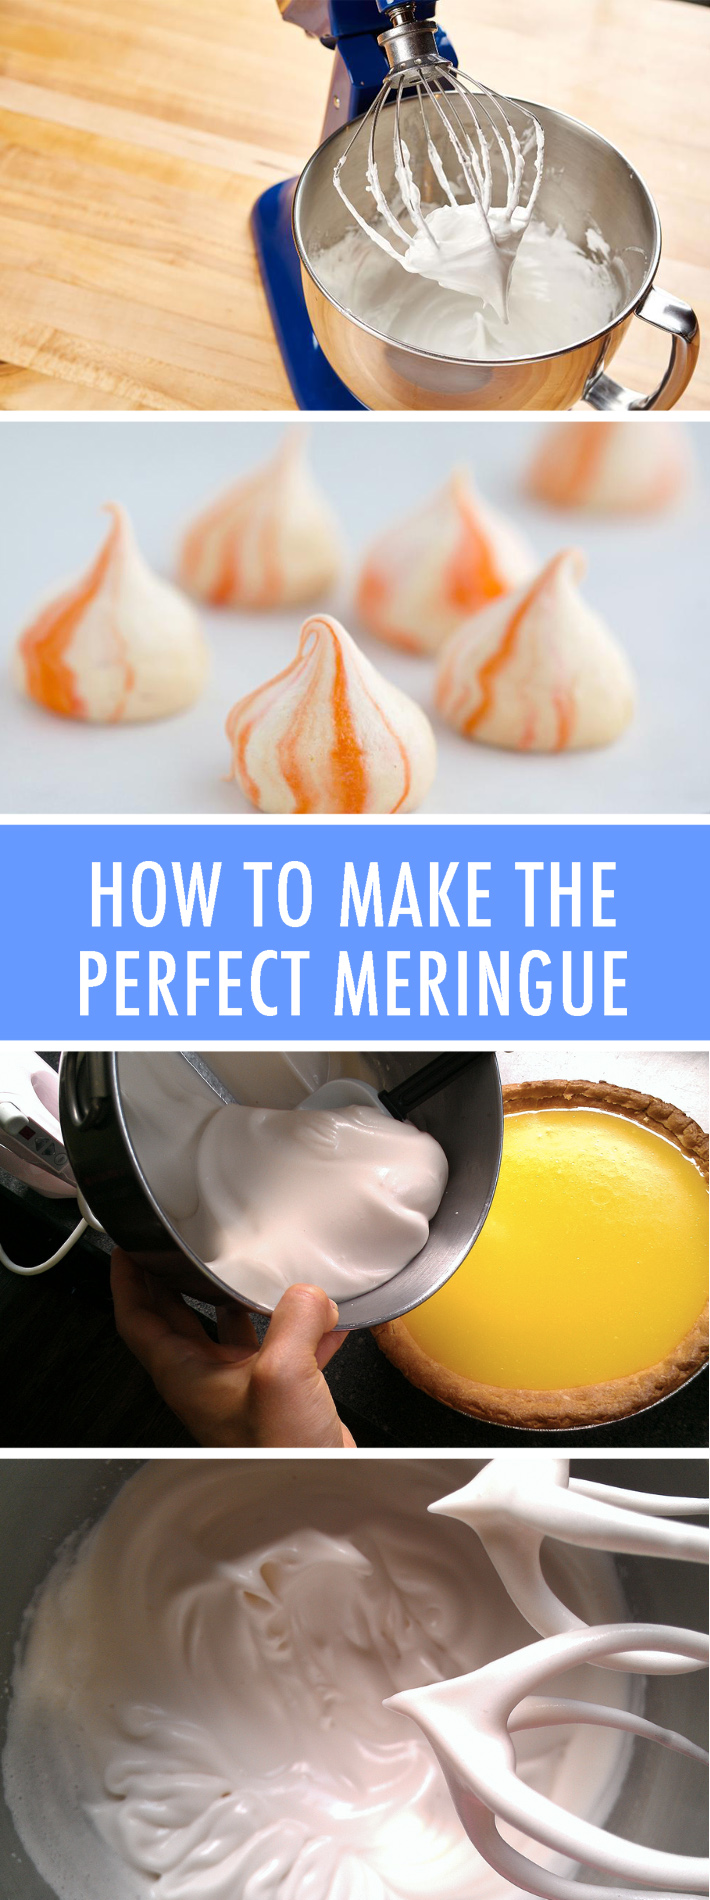 How to make the perfect meringue